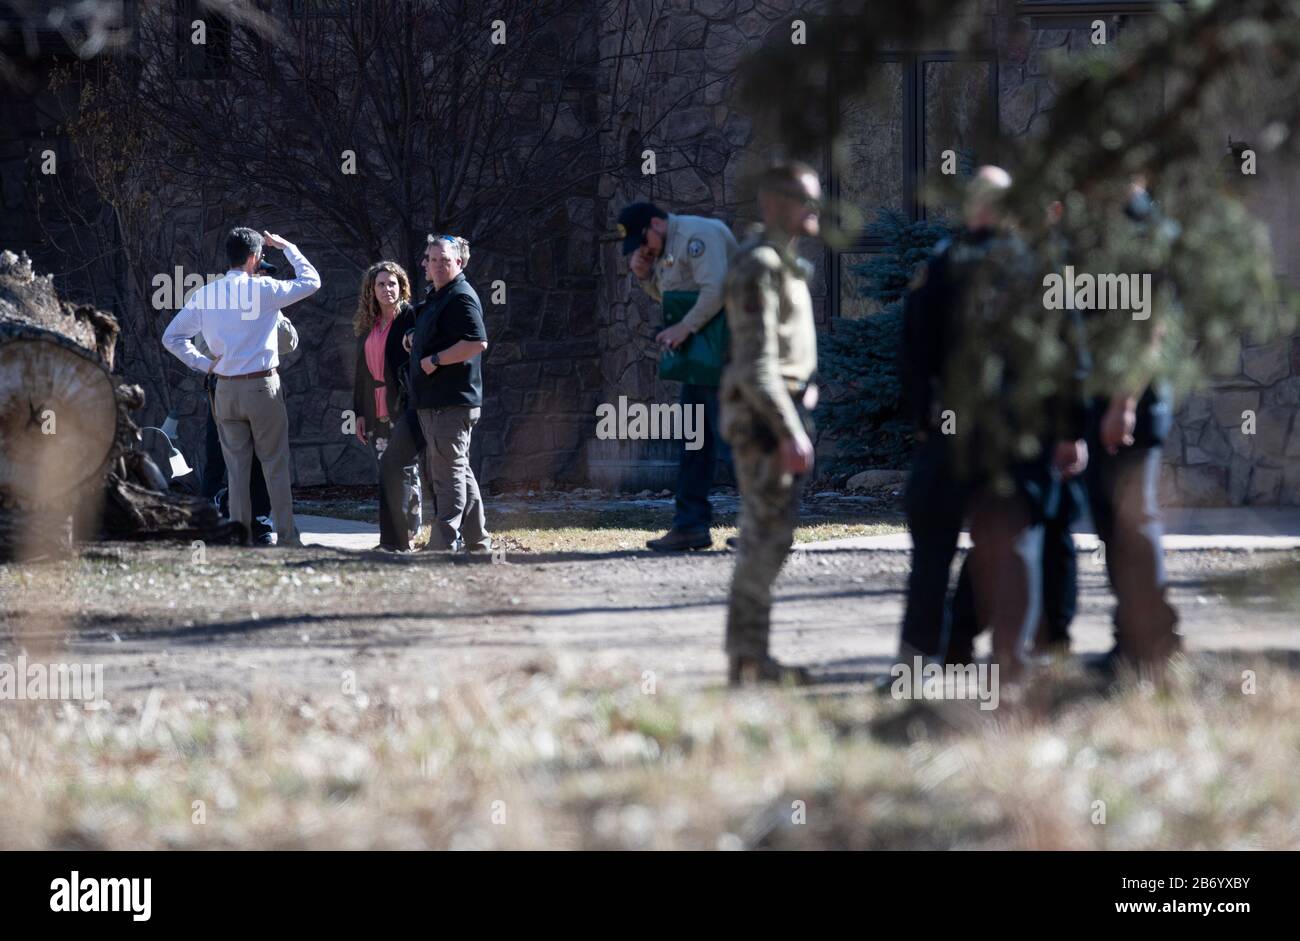 USA. 11th Mar, 2020. Colorado Parks and Wildlife and Larimer County Sheriff's Office work the scene where a mountain lion was killed at 2422 Black Crow Lane in Loveland, Colo. on Wednesday, March 11, 2020. The mountain lion attacked one person and a responding sheriff's deputy prior to being shot and killed. 031120 Mountainlion 05 Bb (Photo by Bethany Baker/The Coloradoan/Imagn/USA Today Network/Sipa USA) Credit: Sipa USA/Alamy Live News Stock Photo